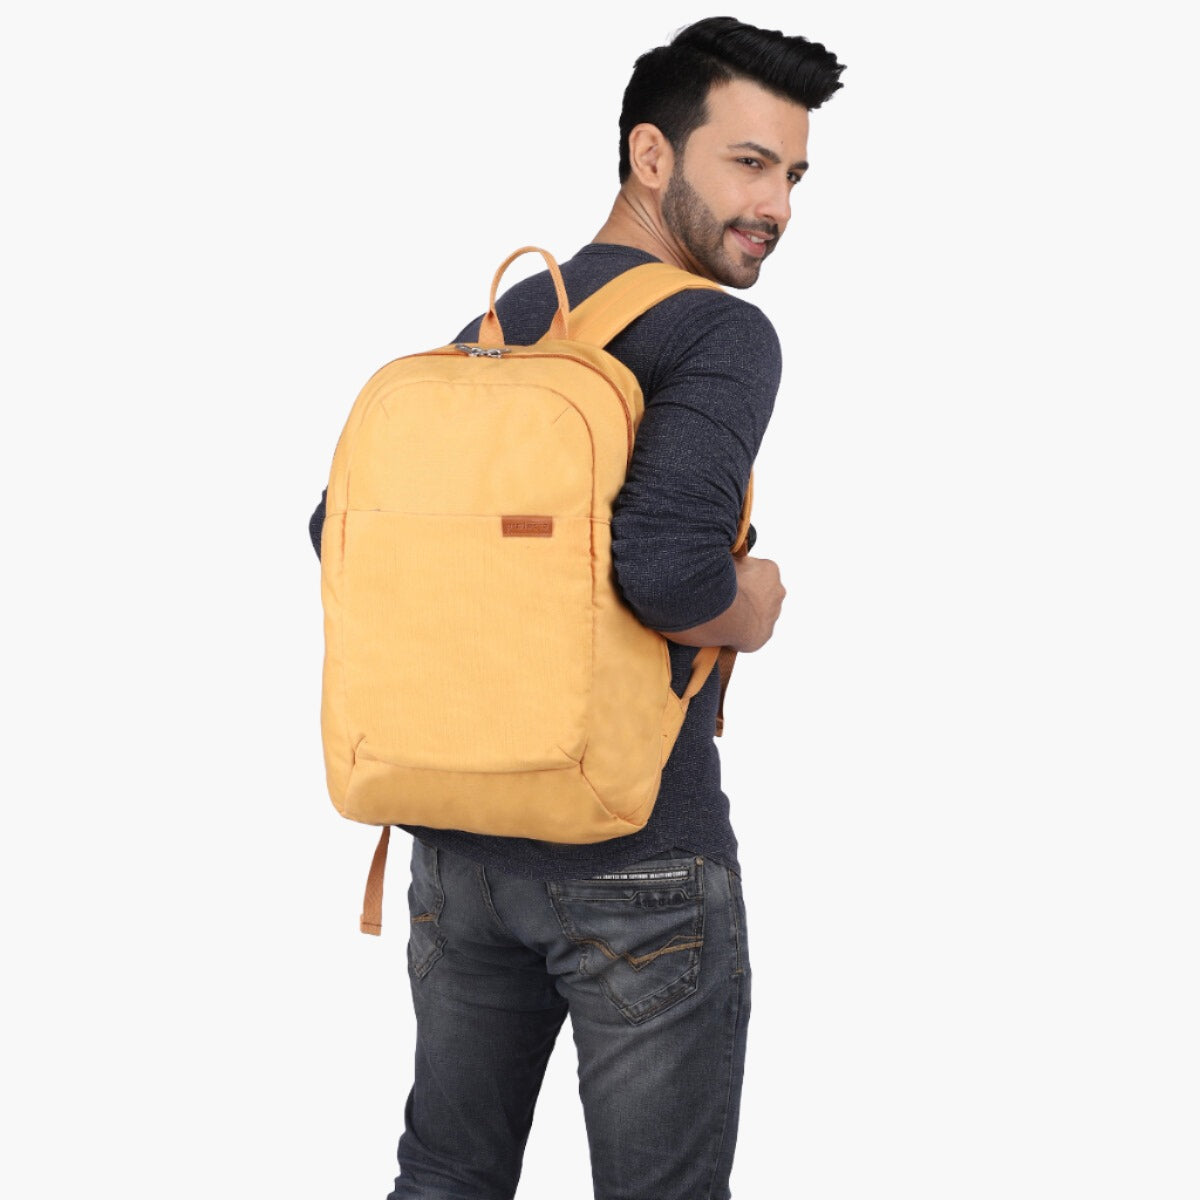 Yellow | Protecta Strong Buzz Laptop Backpack - 6